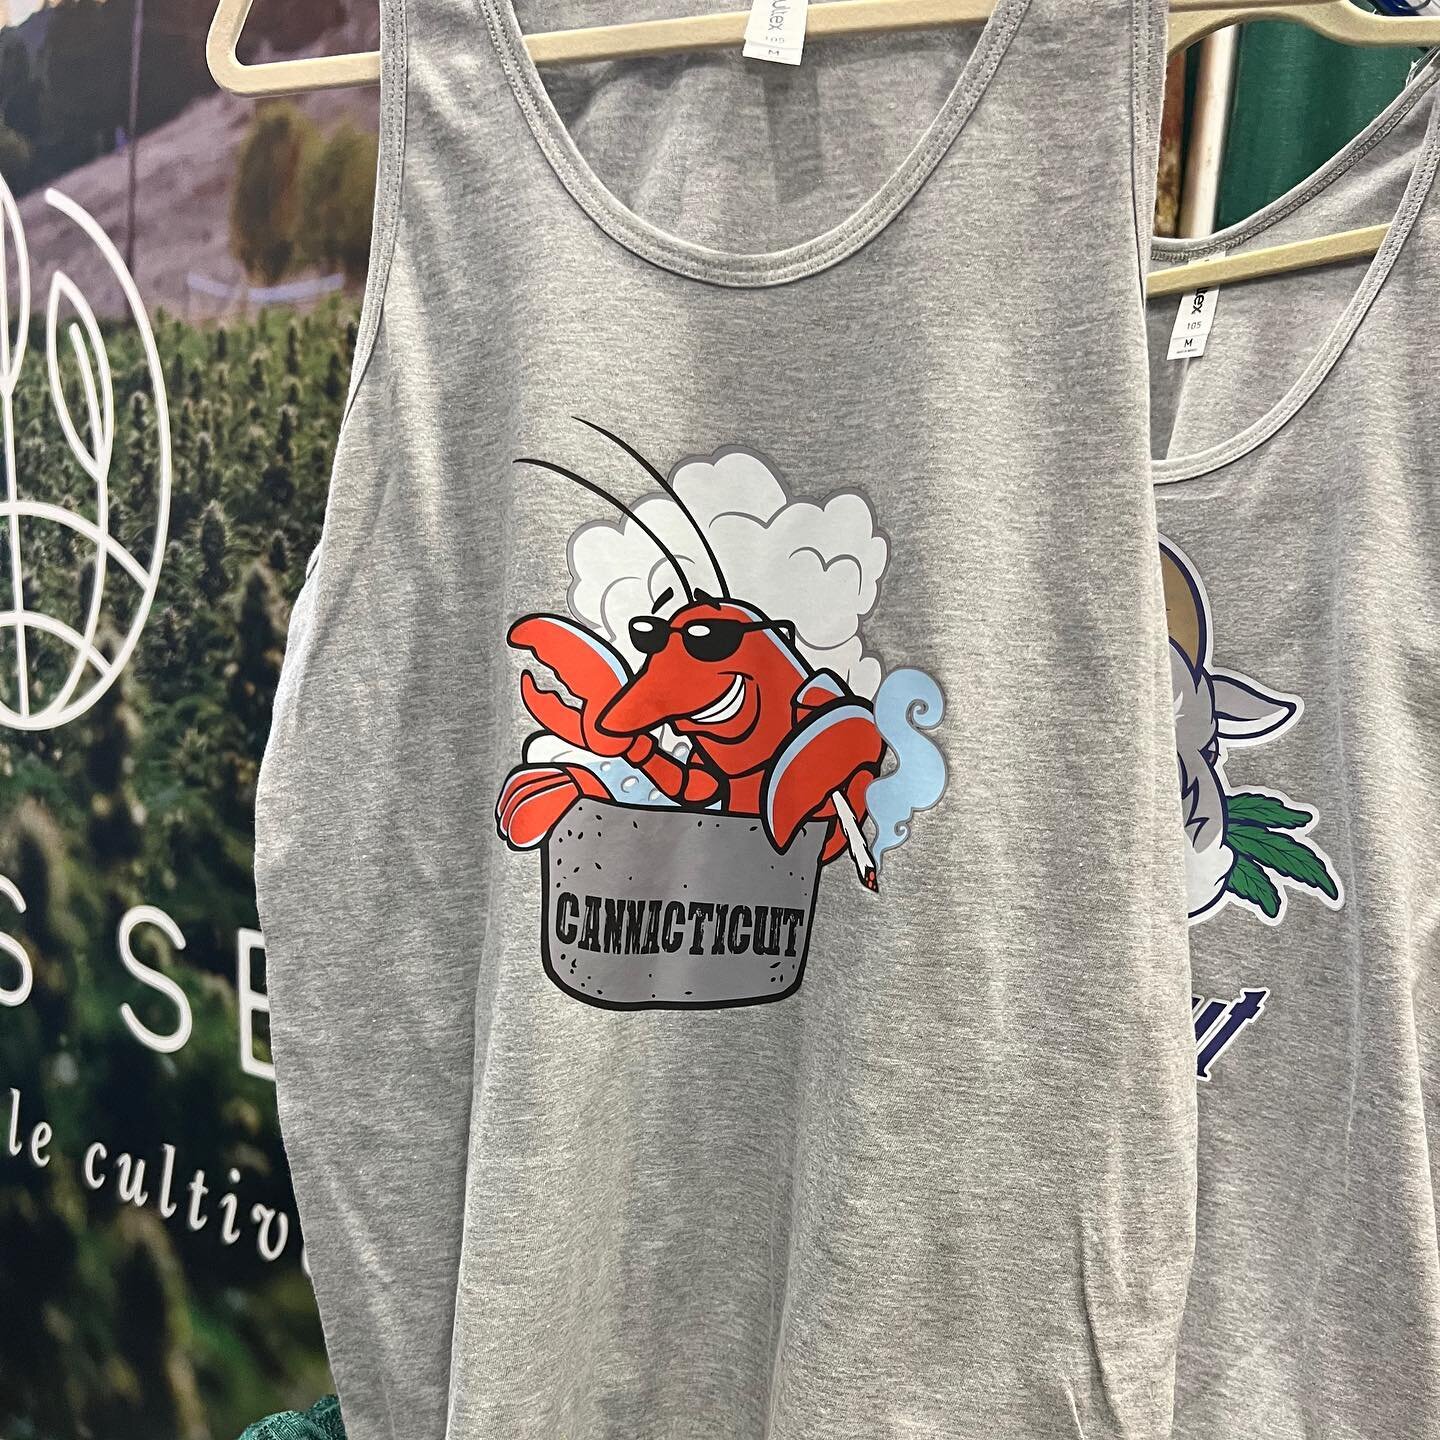 We got some new merch up on the website, our newest friend Red the lobster 🦞like the rest of the Cannacticut Crew this lobster stays baked. Grab Red and our Lobster Baked tank tops while supplies last. There&rsquo;s only 50 (well 47 now) and they&rs